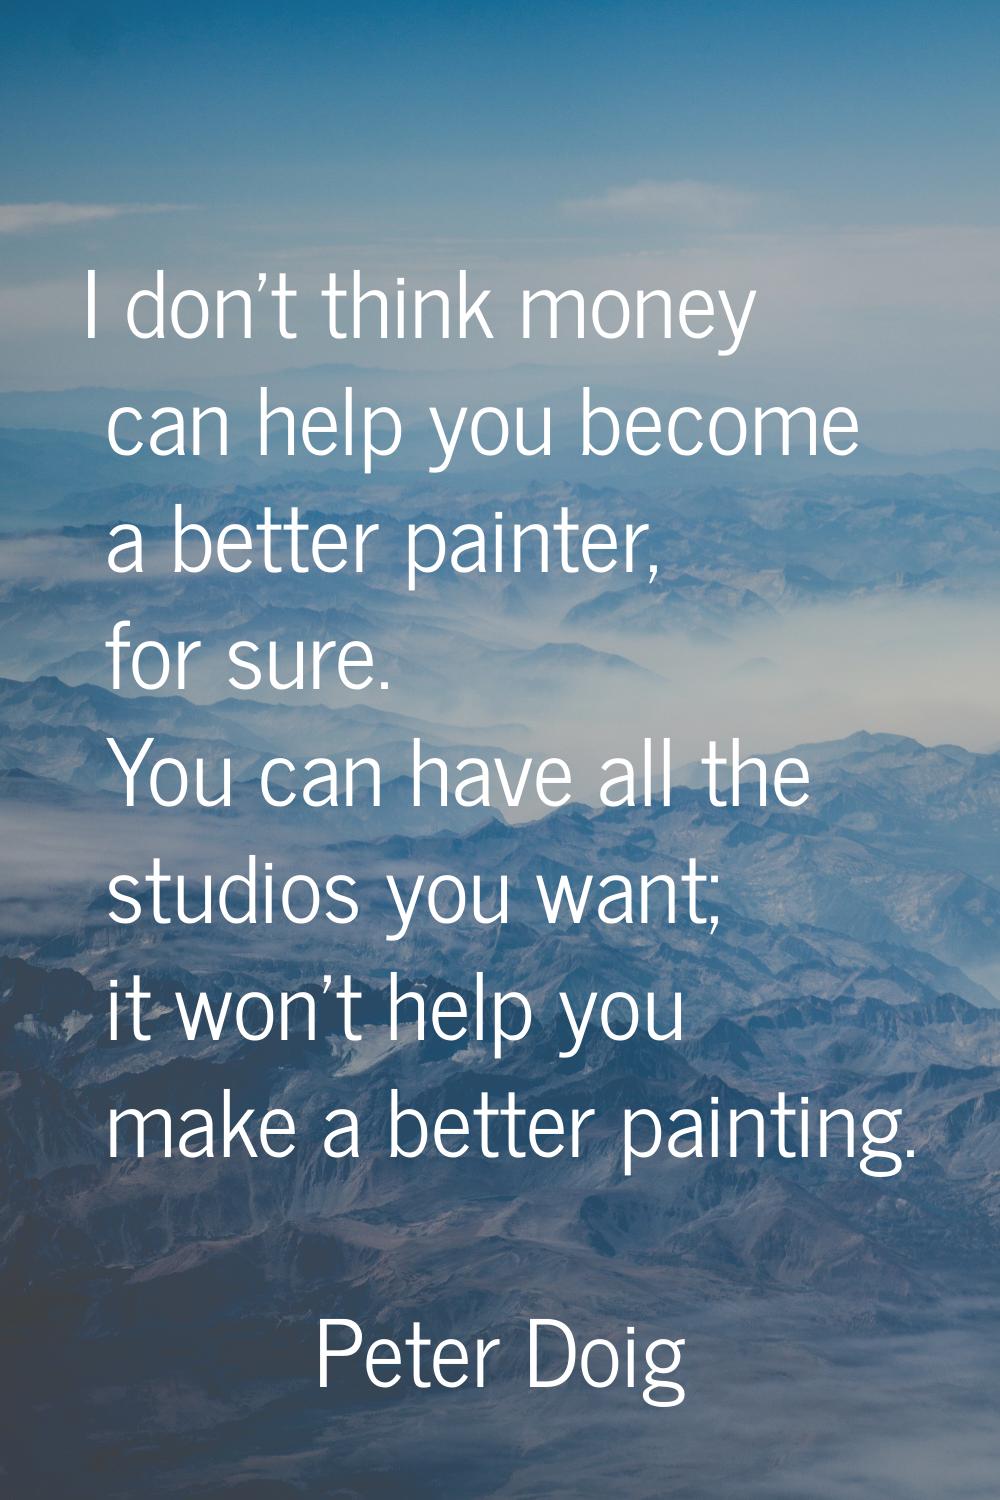 I don't think money can help you become a better painter, for sure. You can have all the studios yo